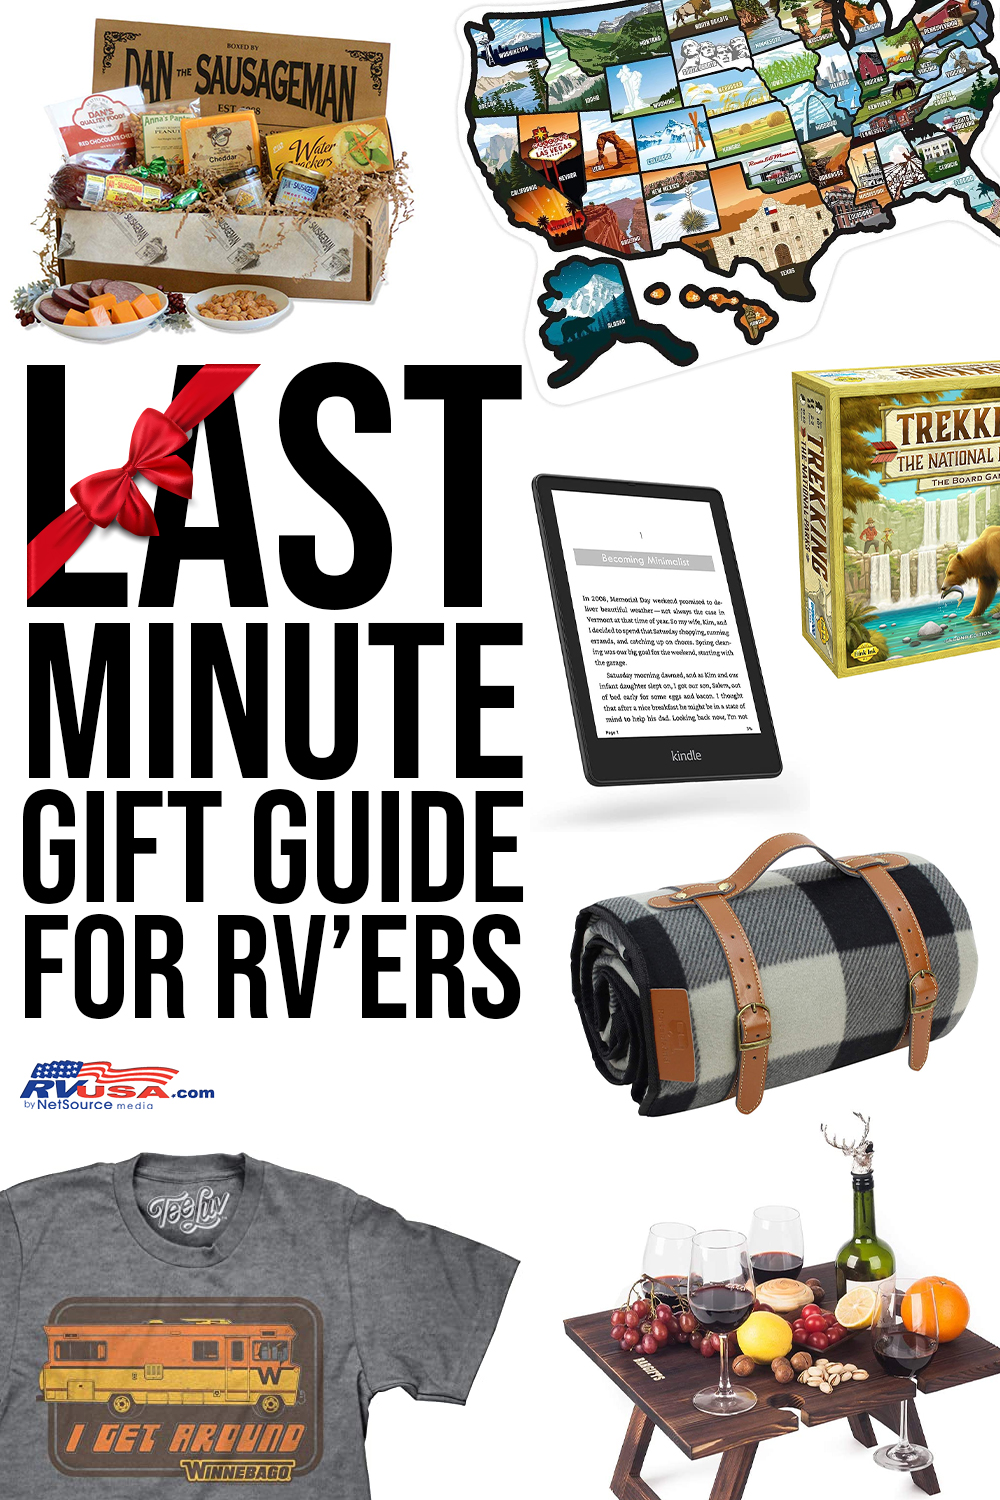 A graphic displays a variety of items that can be purchased as last minute RV gifts